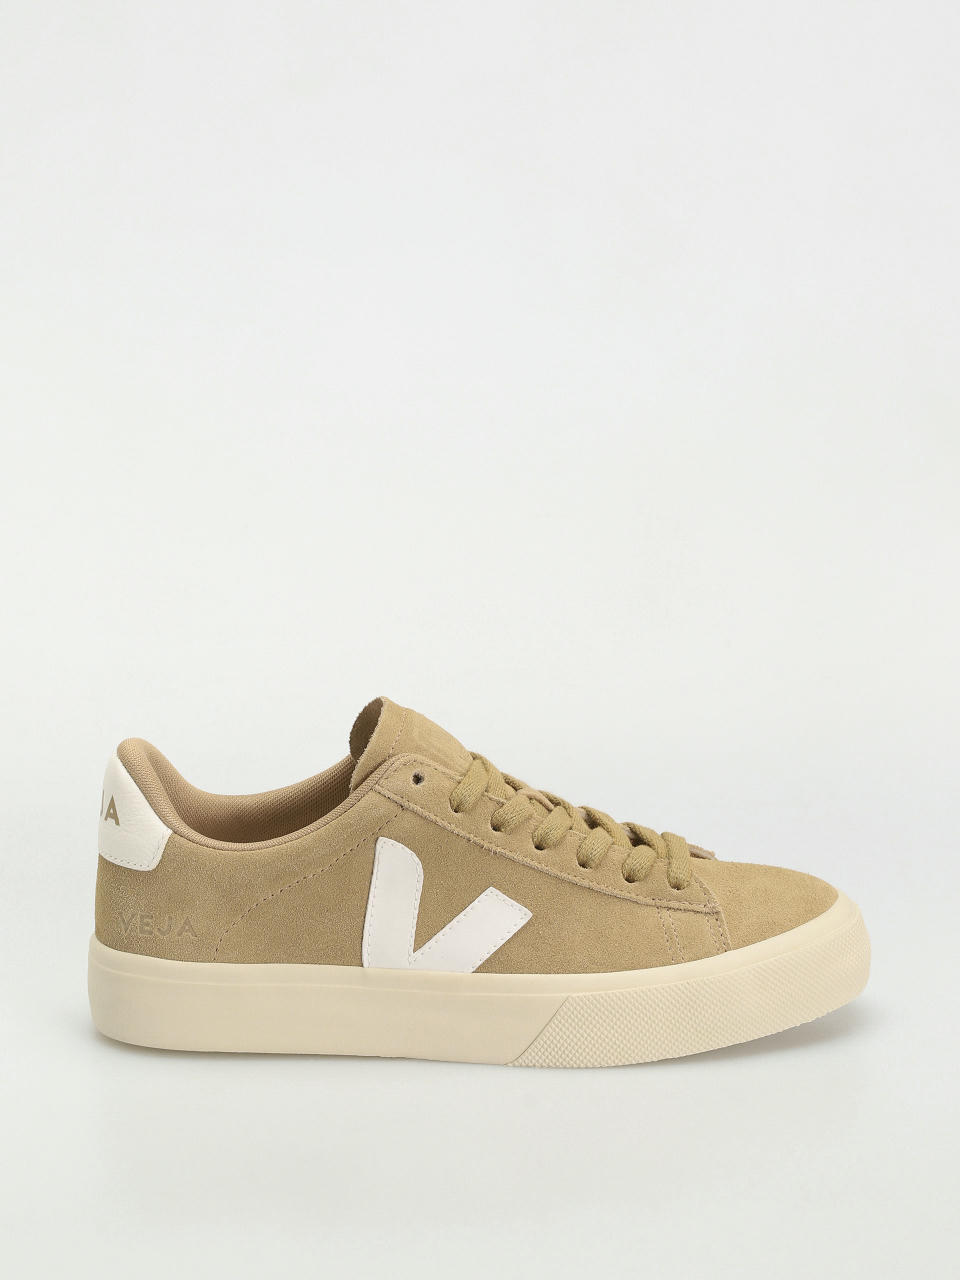 Veja Campo Wmn Shoes (dune white)